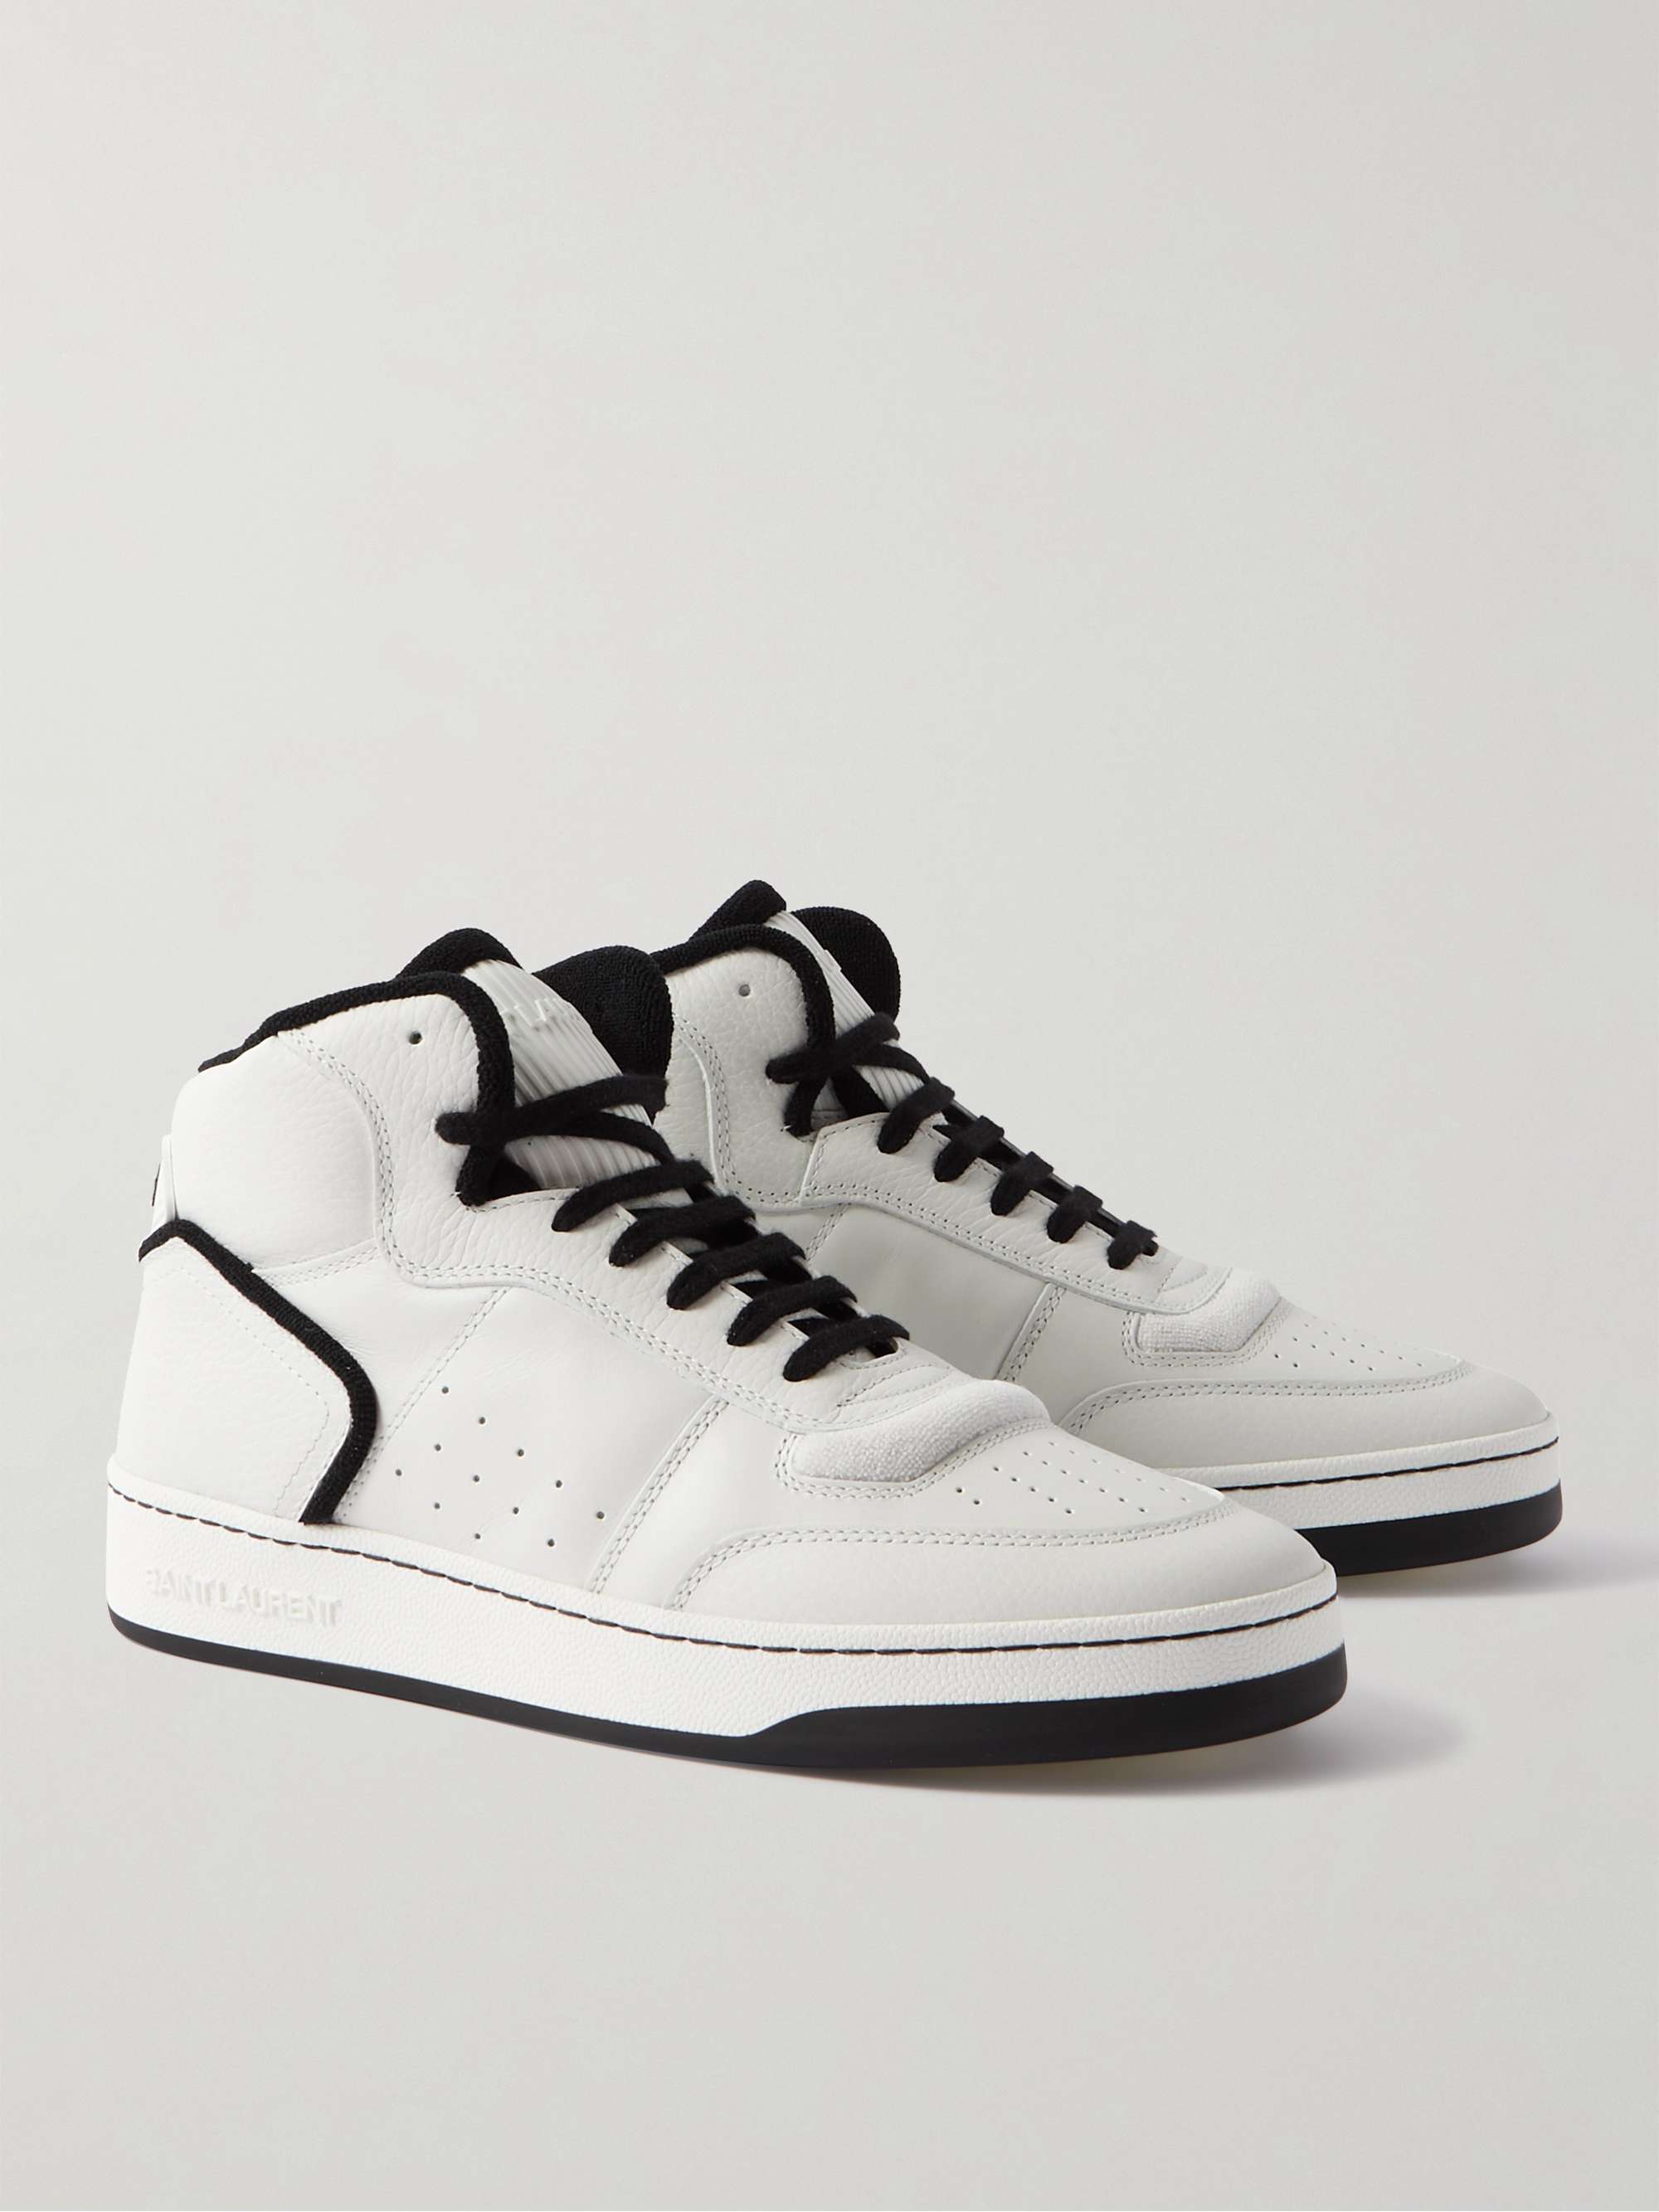 SAINT LAURENT SL/80 Perforated Leather High-Top Sneakers for Men | MR ...